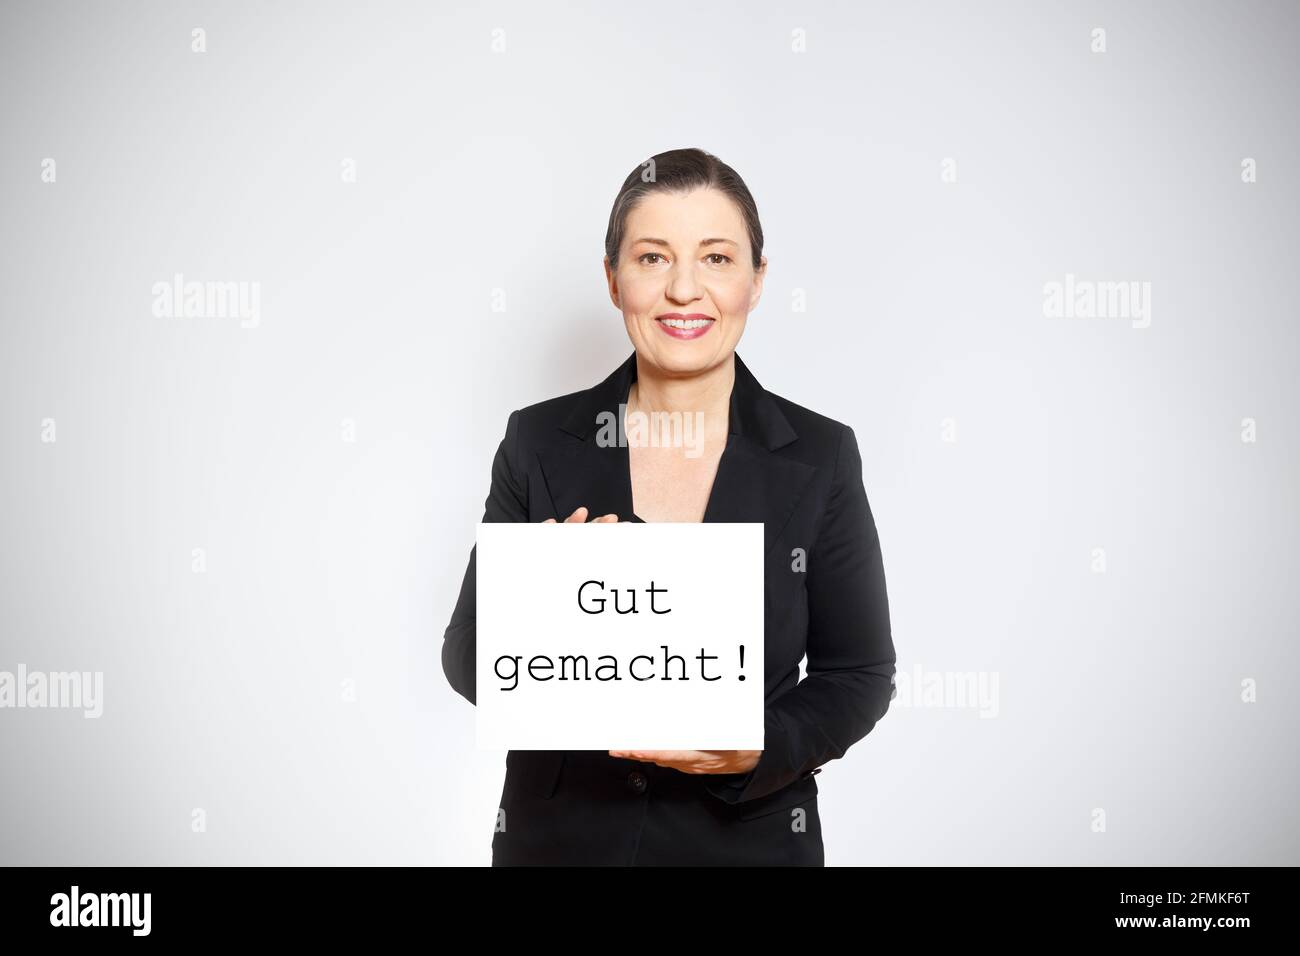 Smiling middle aged woman in black blazer holding up a sign with the text well done in german, white background. Stock Photo